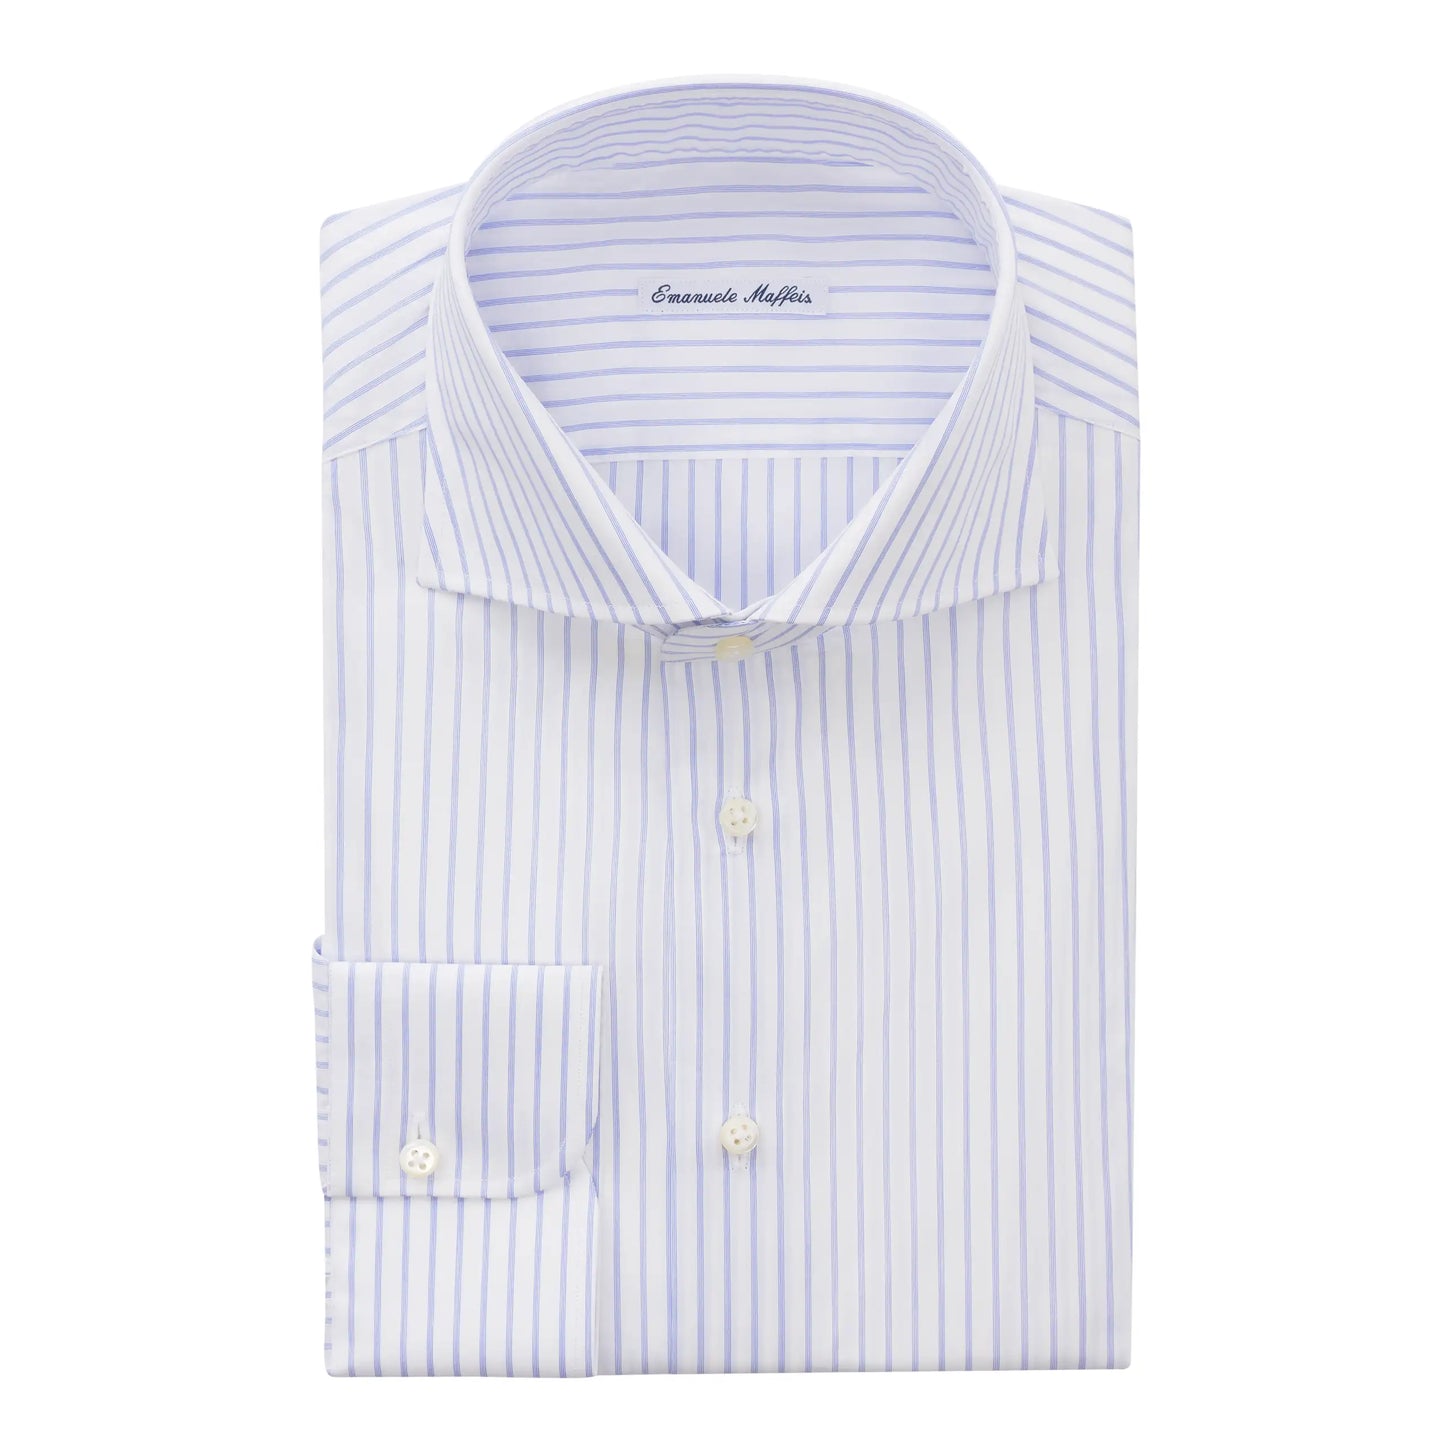 Striped Cotton White and Blue Shirt with Cutaway Collar